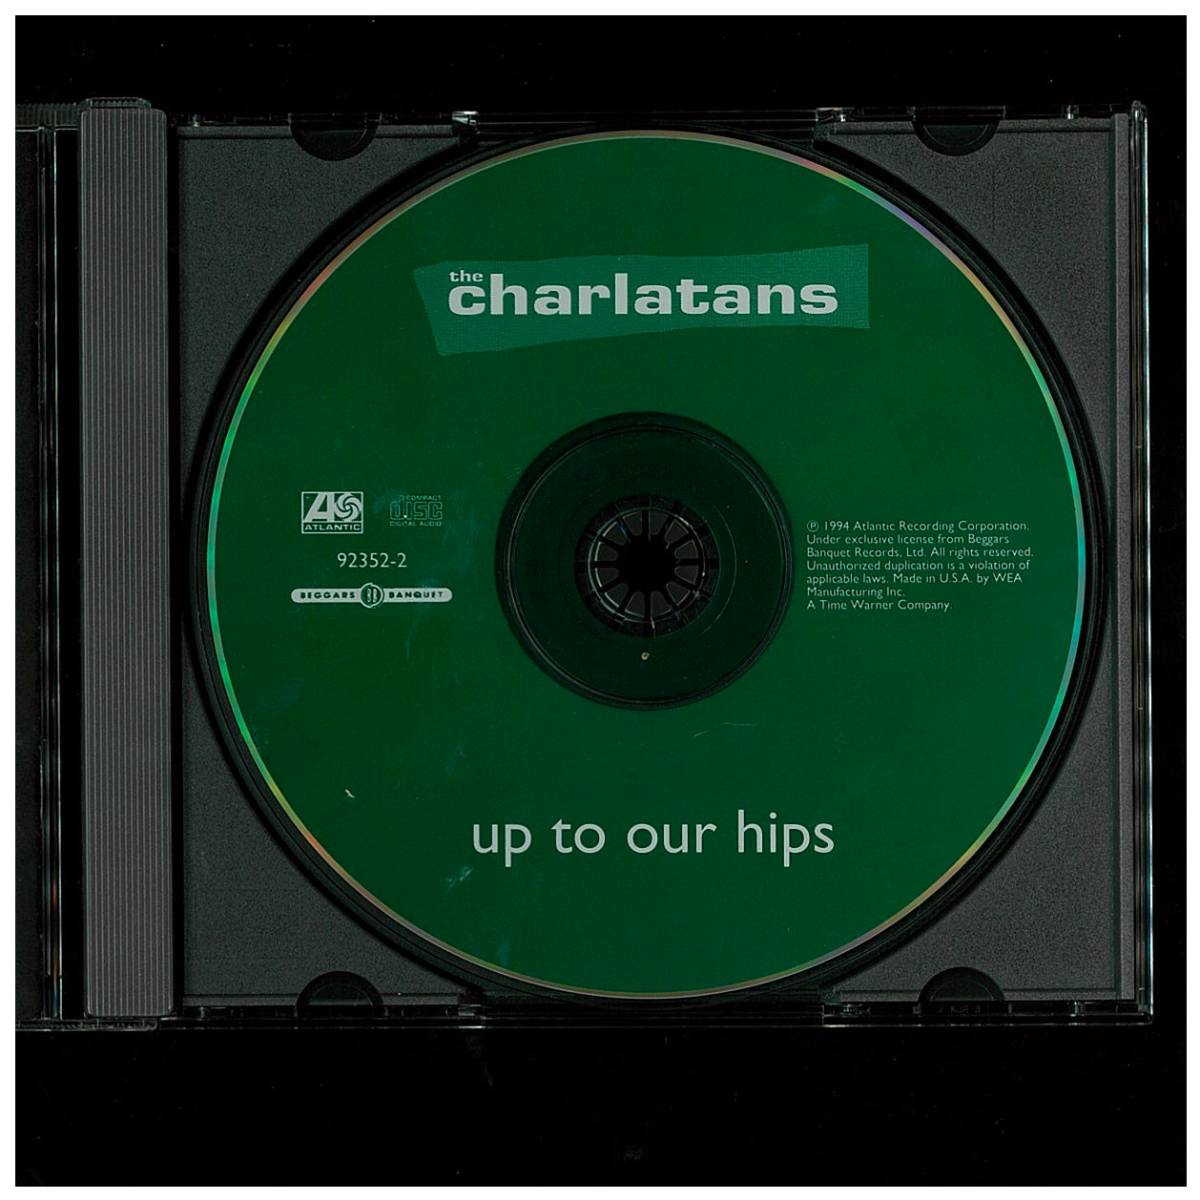 CD☆The Charlatans☆ザ シャーラタンズ☆Up to Our Hips☆92352-2☆US盤_画像2